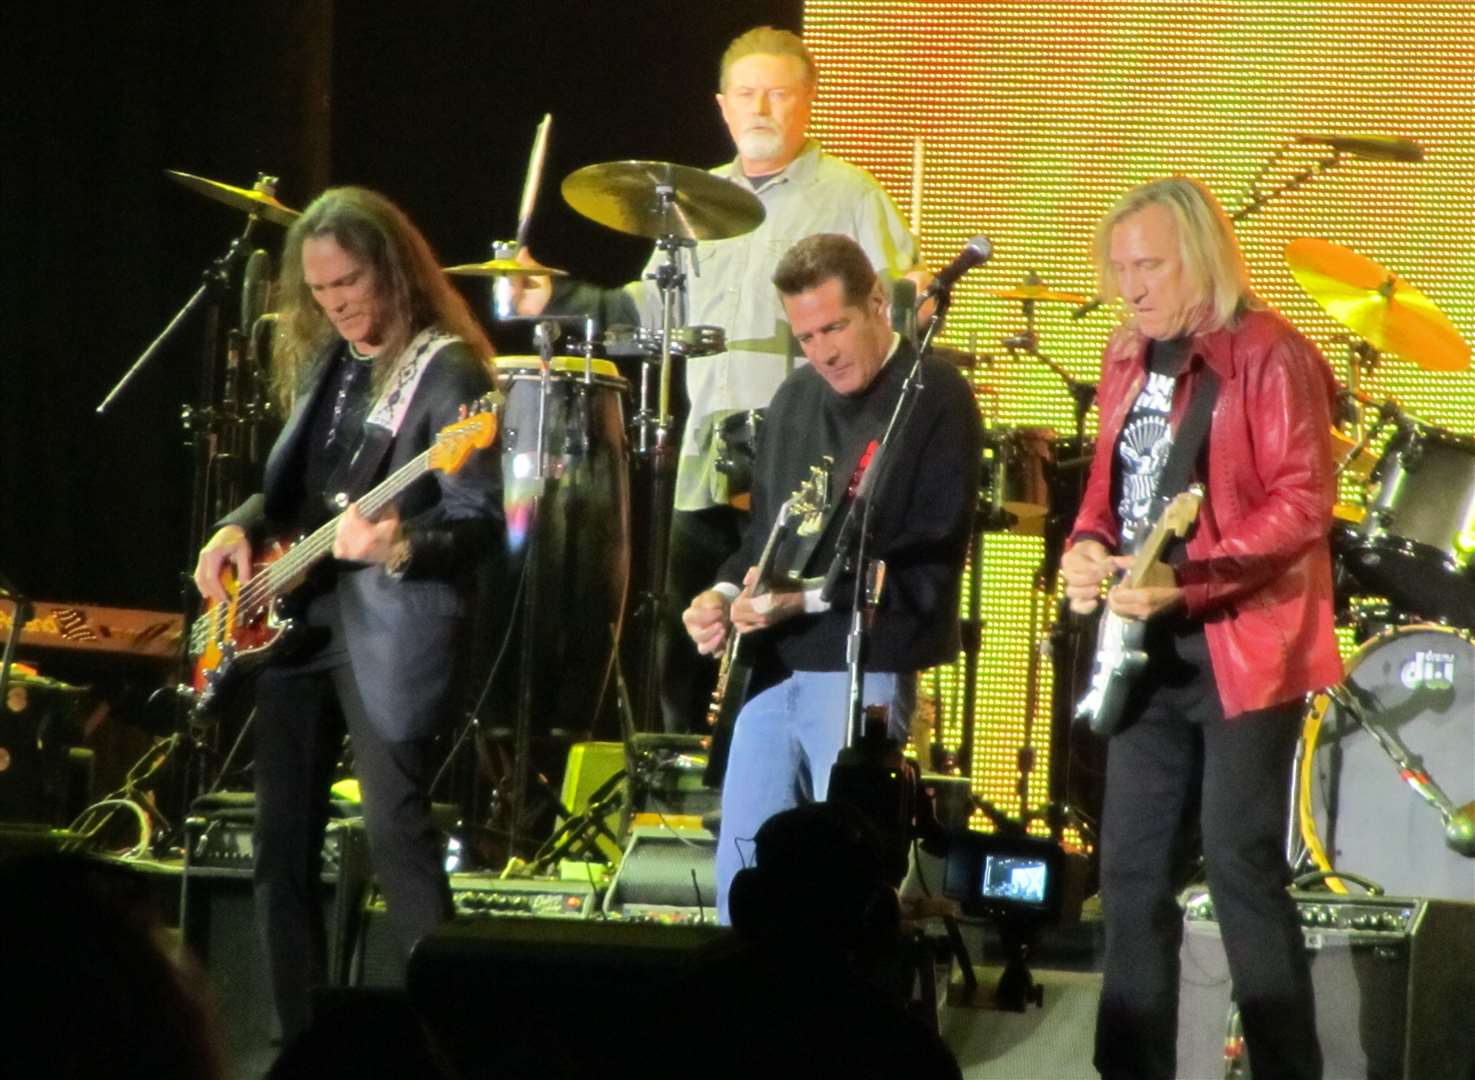 The Eagles previously performed at the Hop Farm Festival